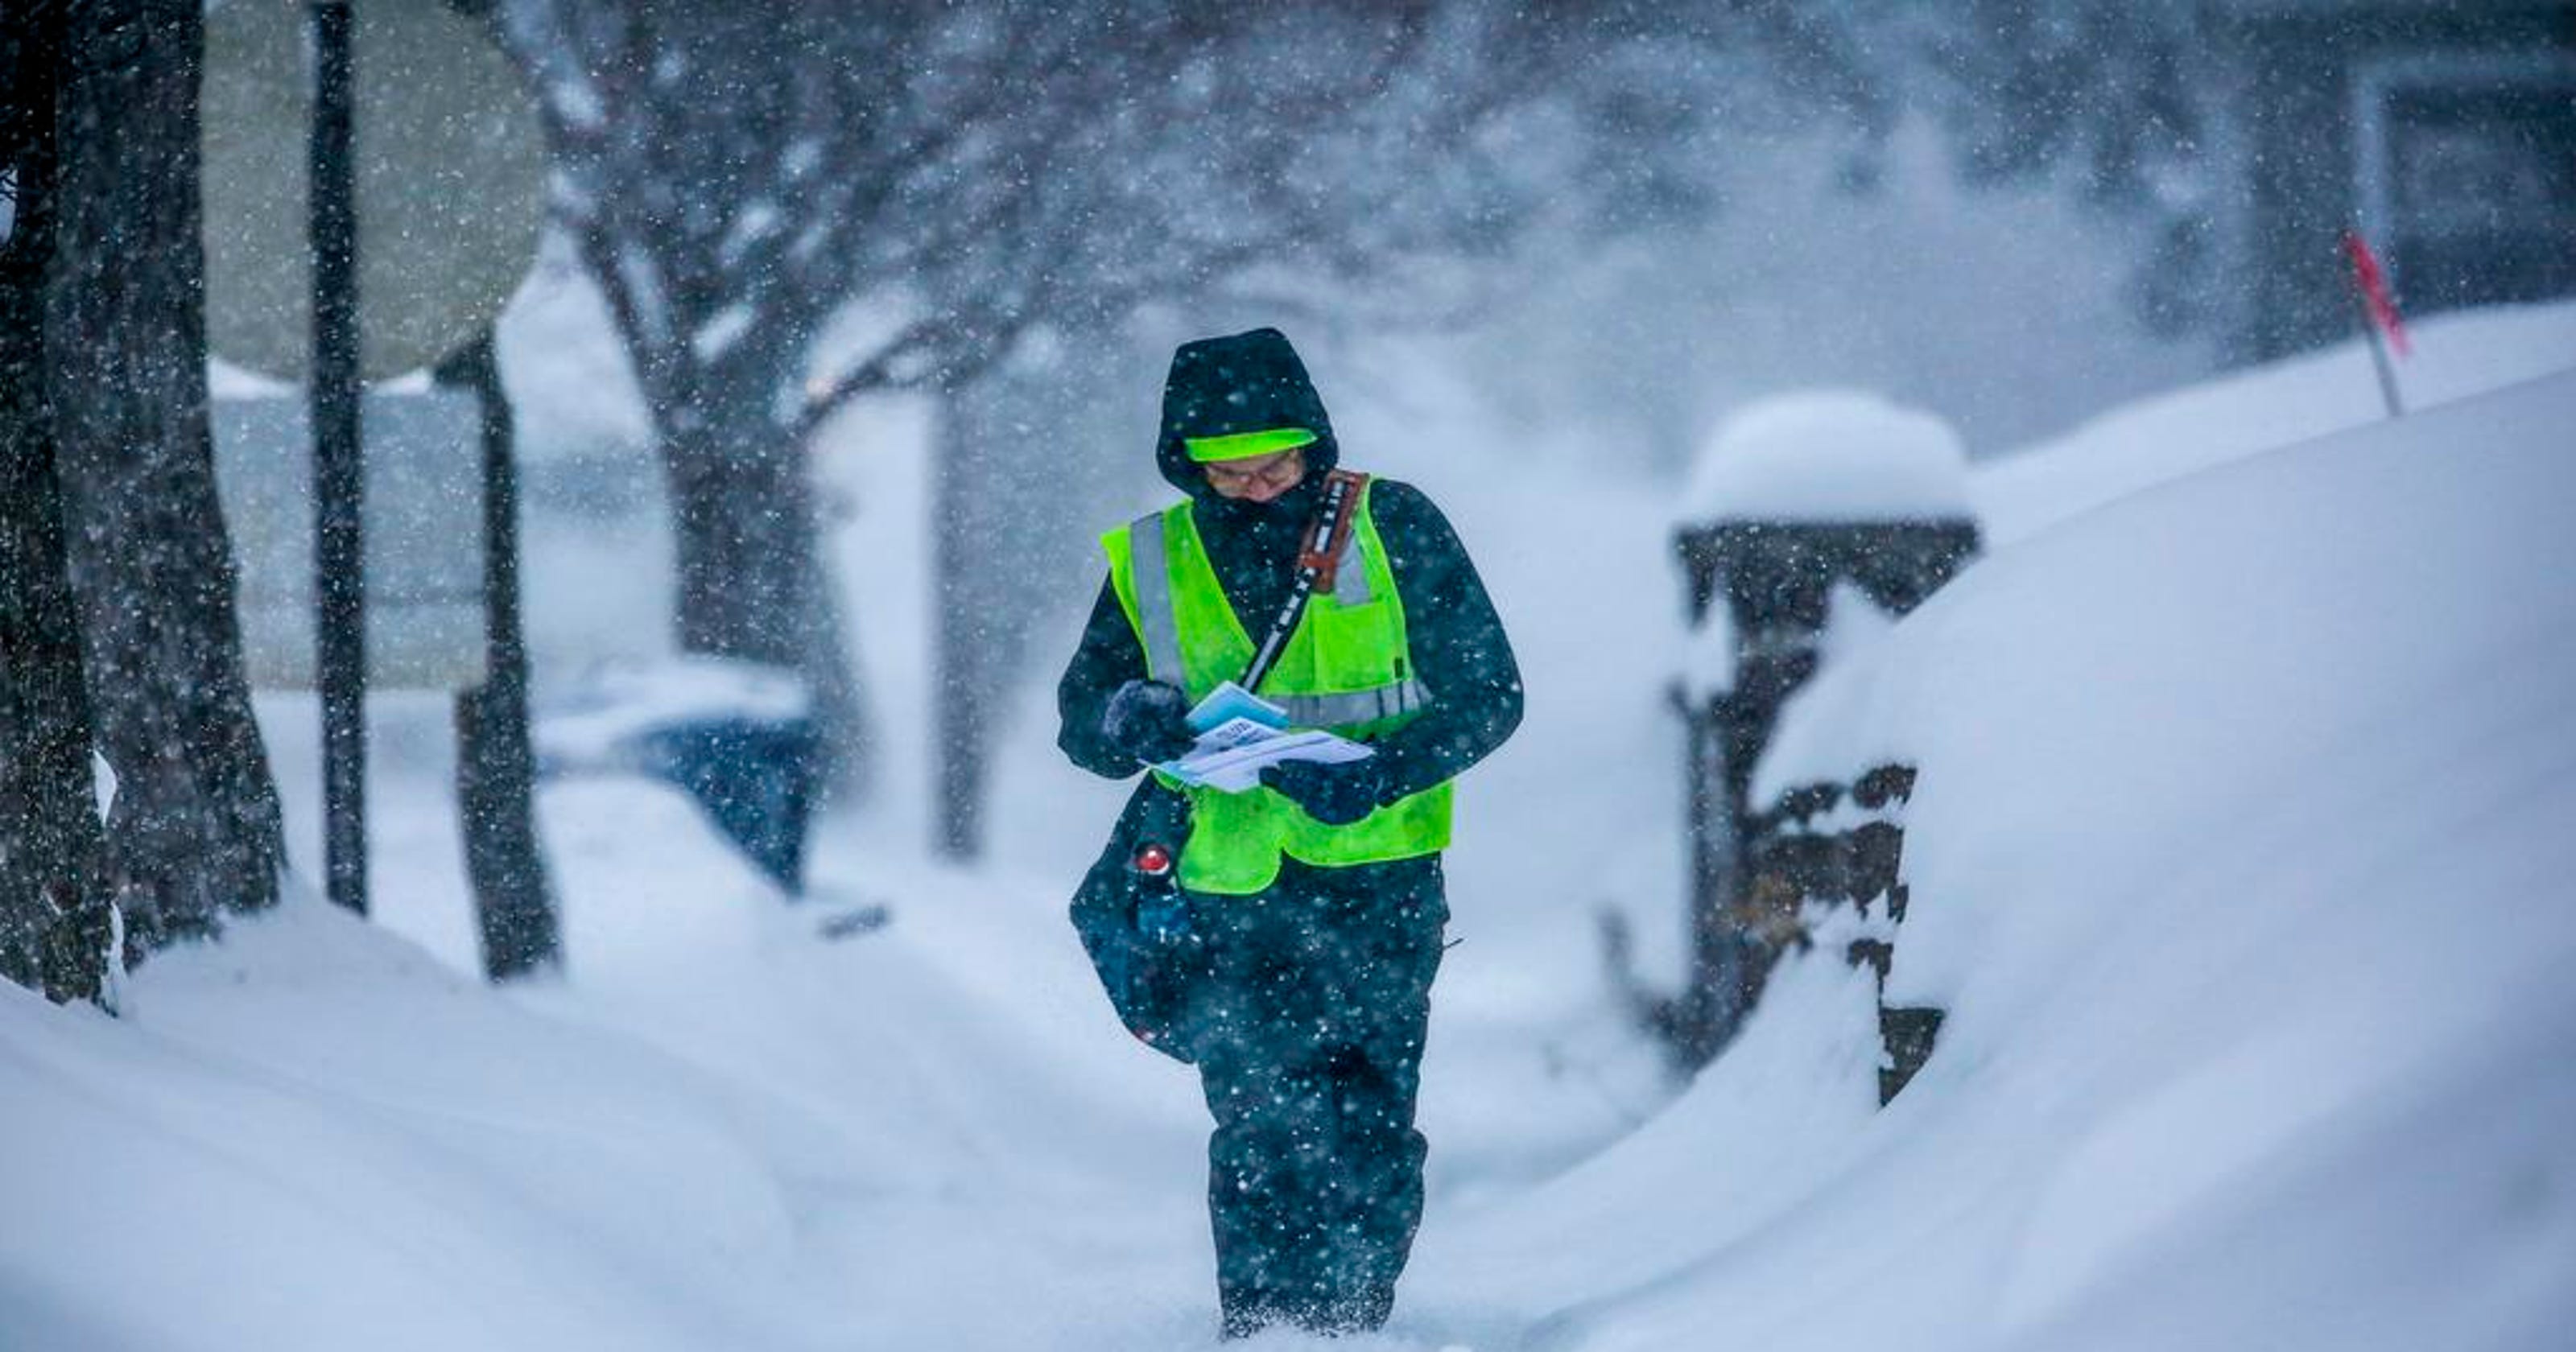 Wisconsin weather Wausau sets alltime snow fall record Tuesday